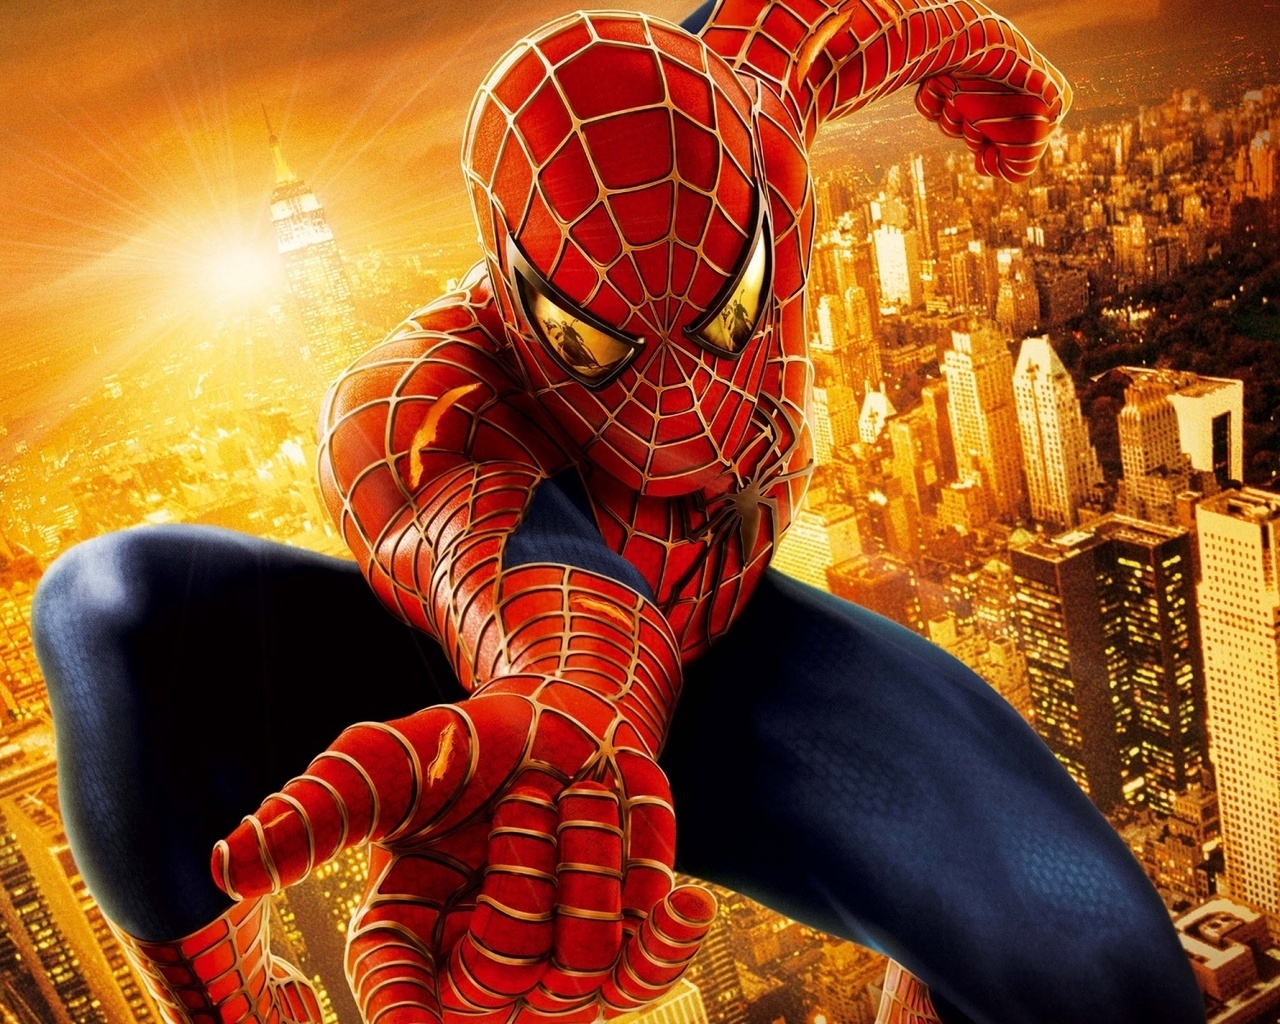 Spiderman Up for 1280 x 1024 resolution